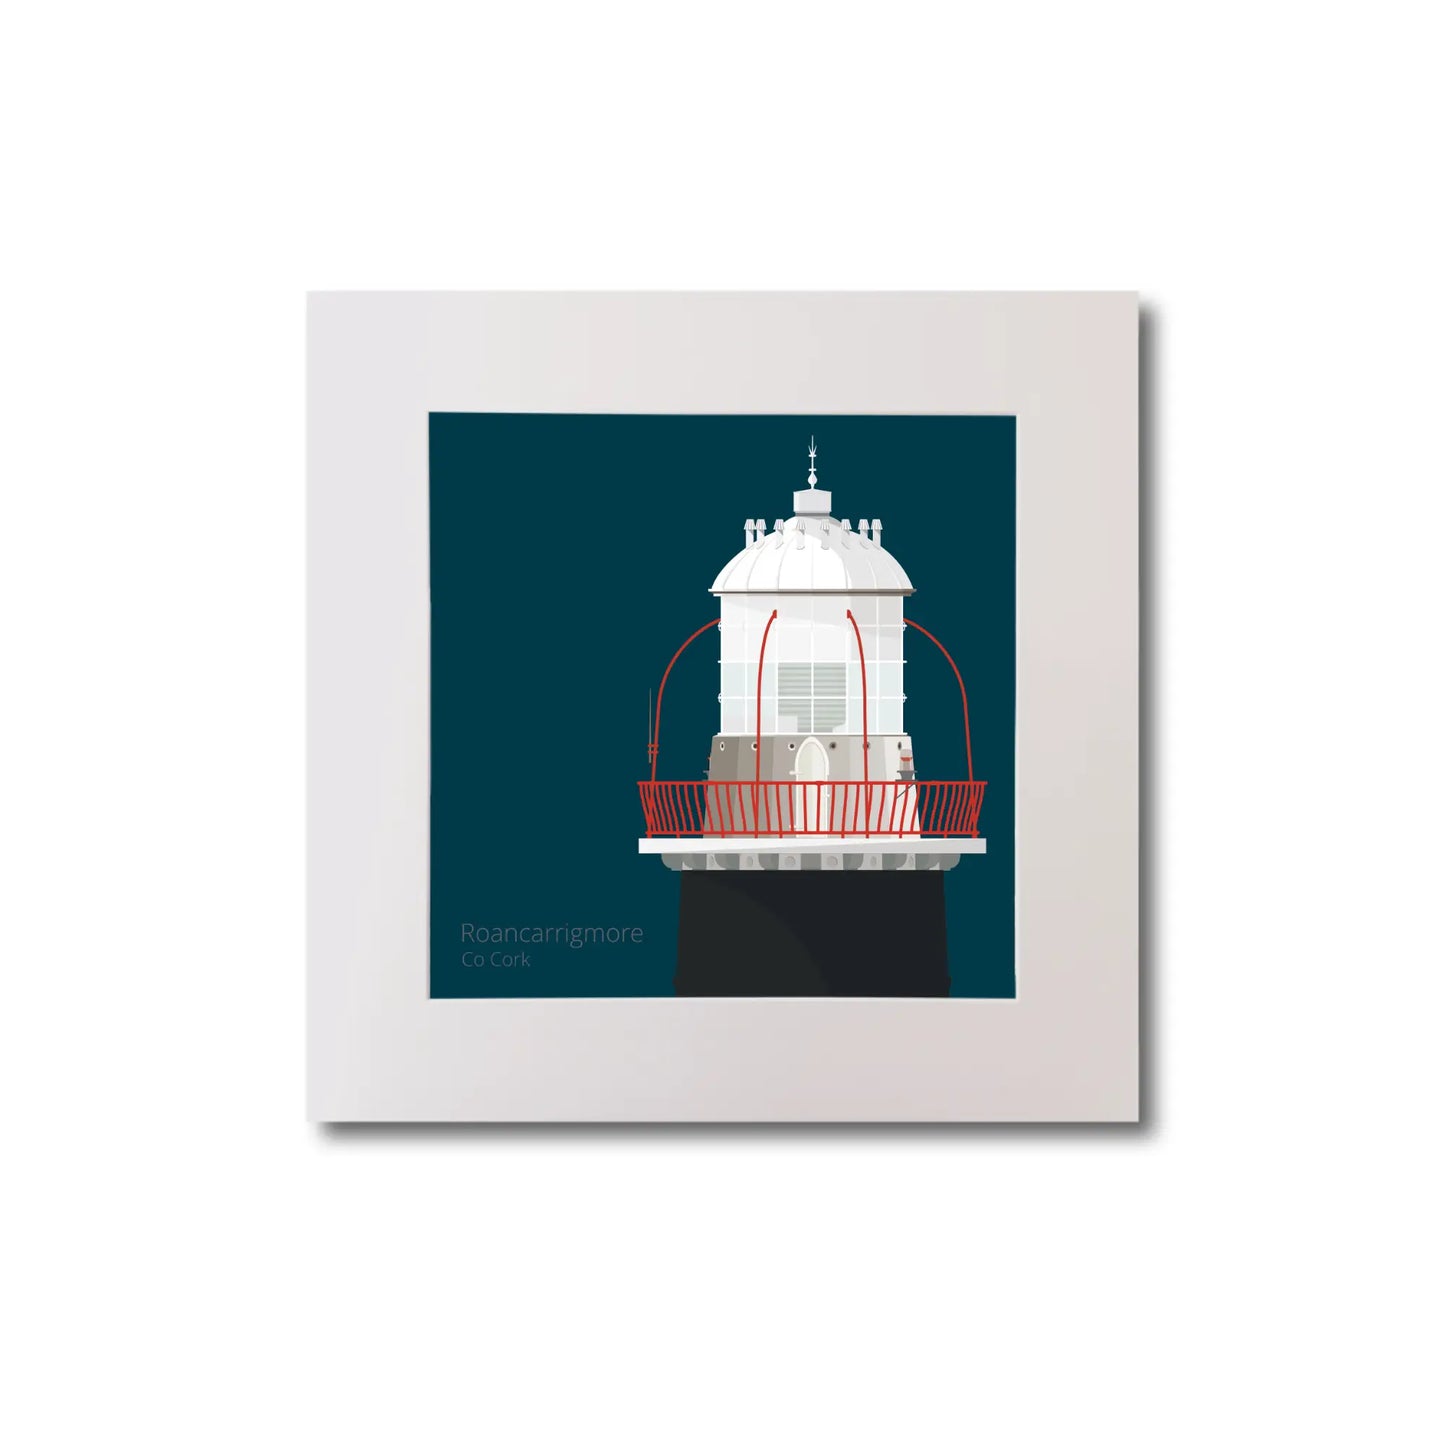 Illustration of Roancarrigmore lighthouse on a midnight blue background, mounted and measuring 20x20cm.